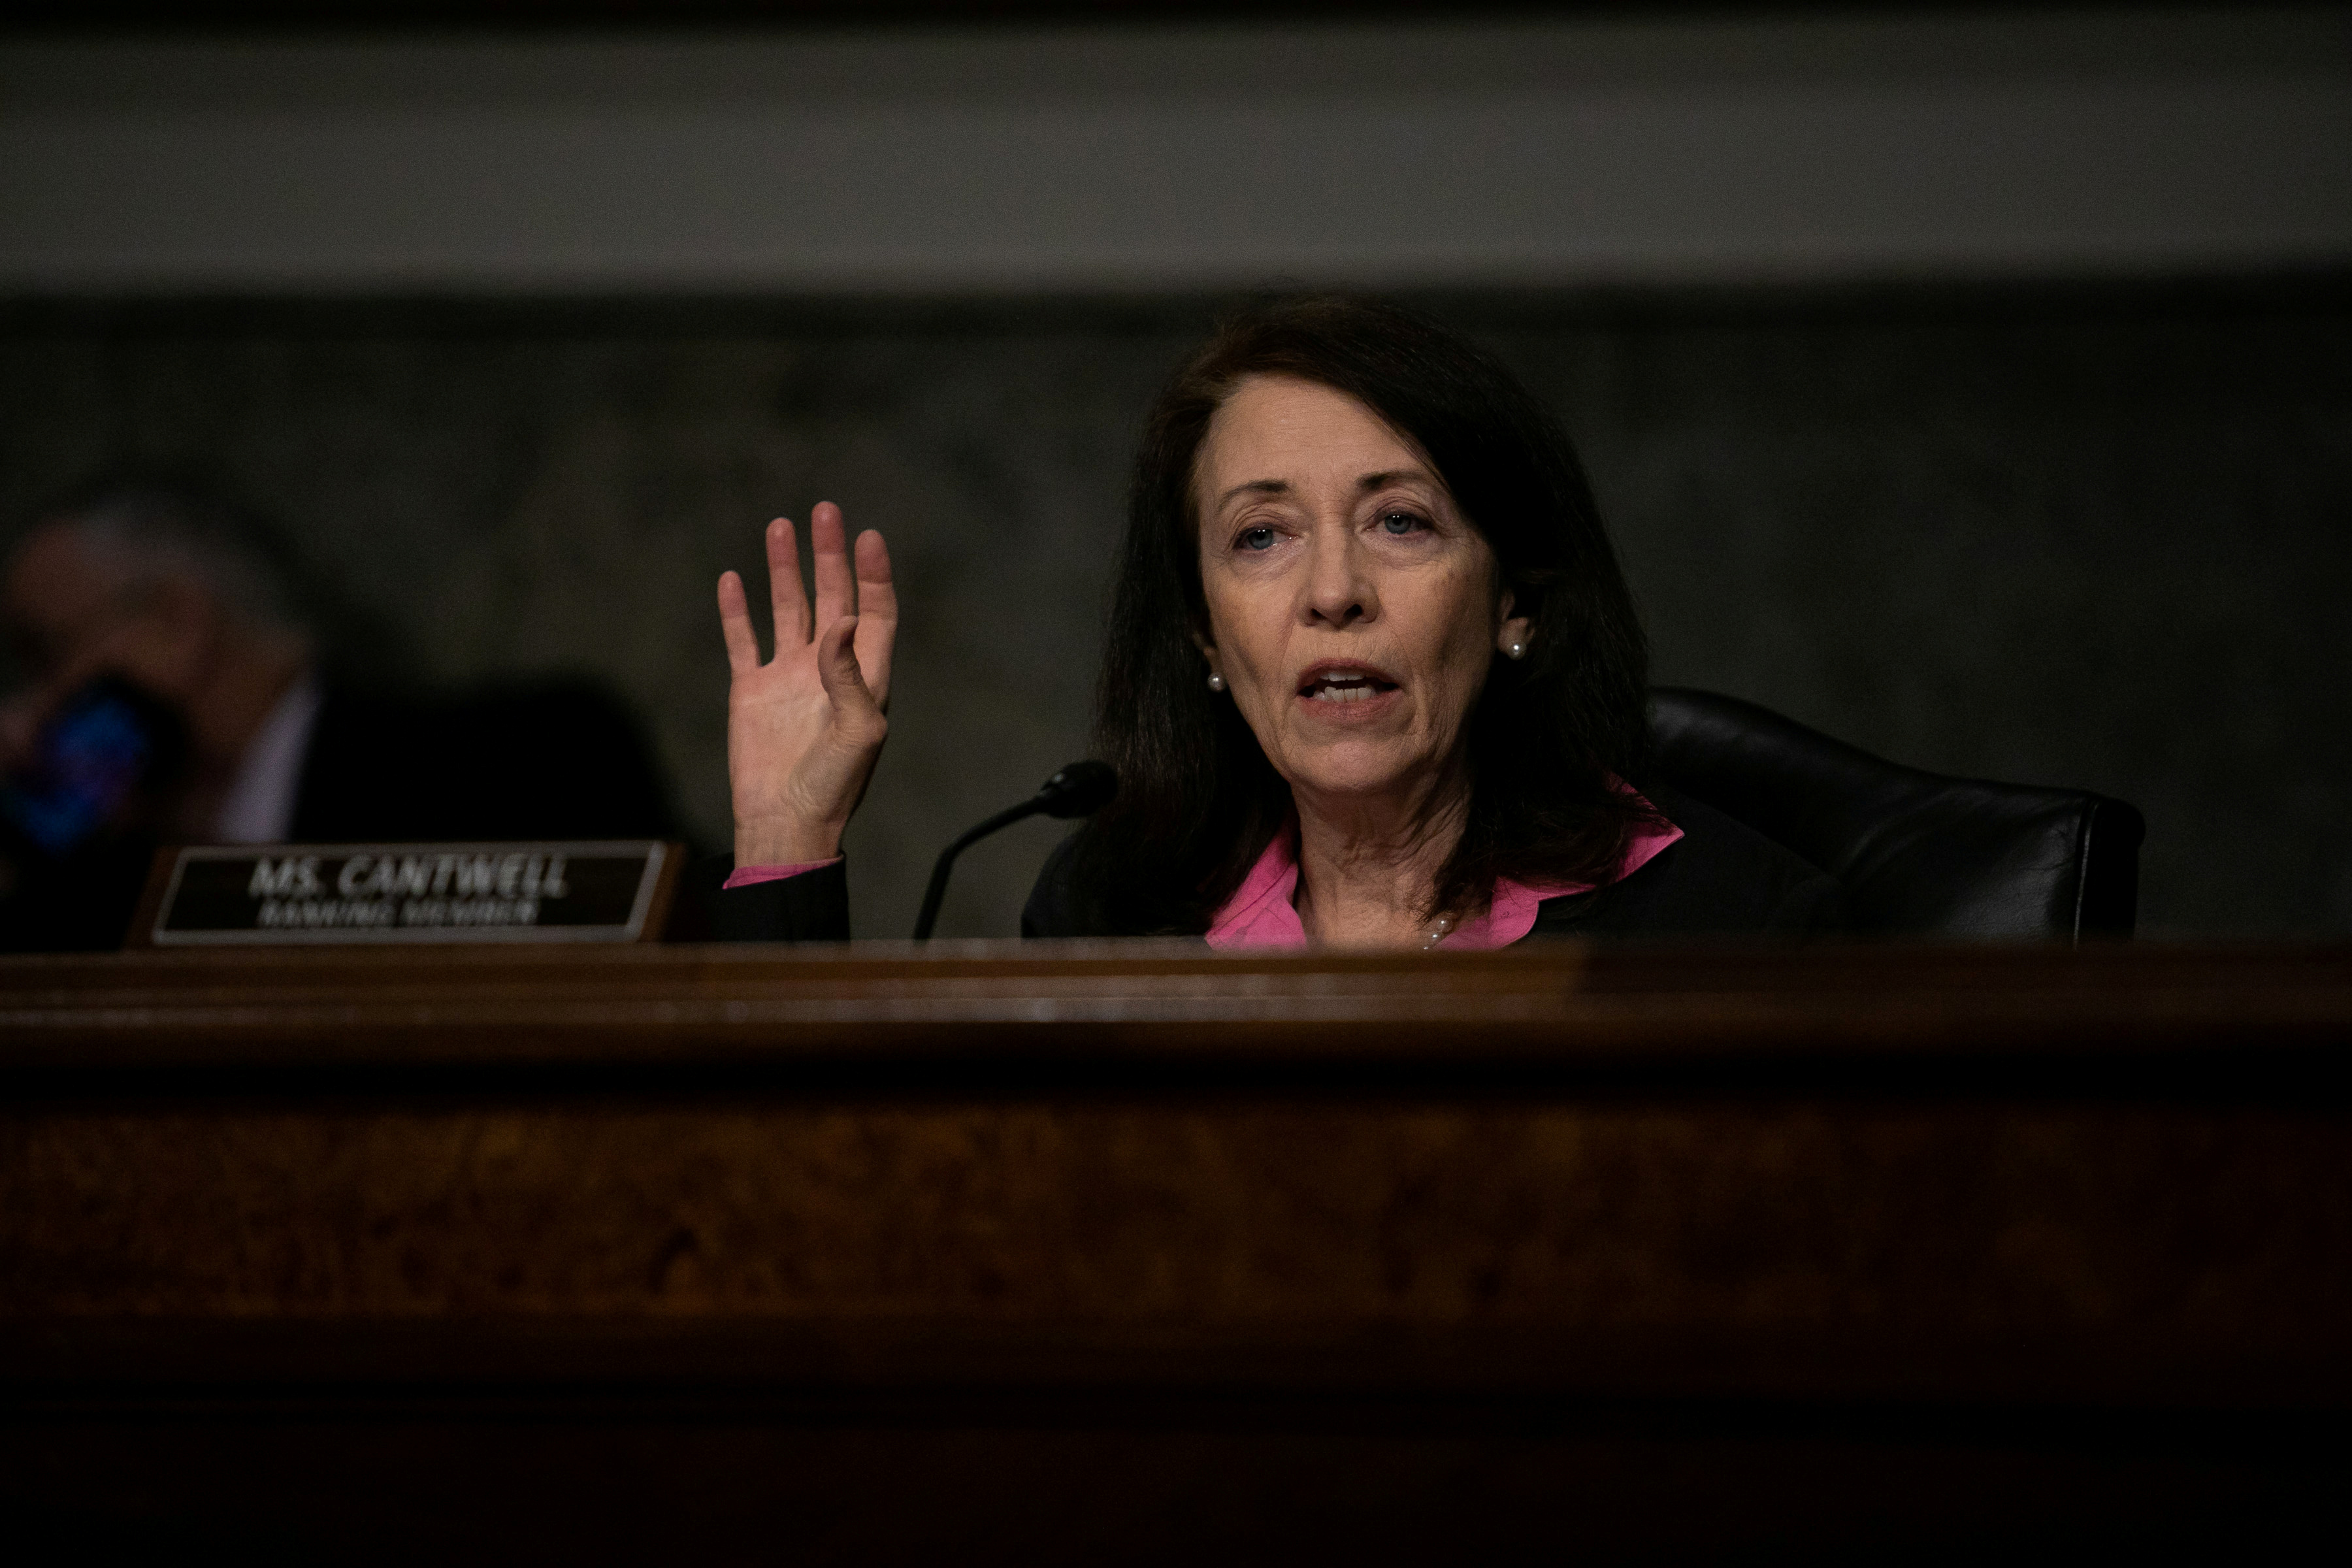 Ranking Member Maria Cantwell (D-WA) speaks during a hearing of the Senate Commerce, Science, and Transportation Committee on Capitol Hill in Washington, U.S., June 17, 2020. Graeme Jennings/Pool via REUTERS/File Photo